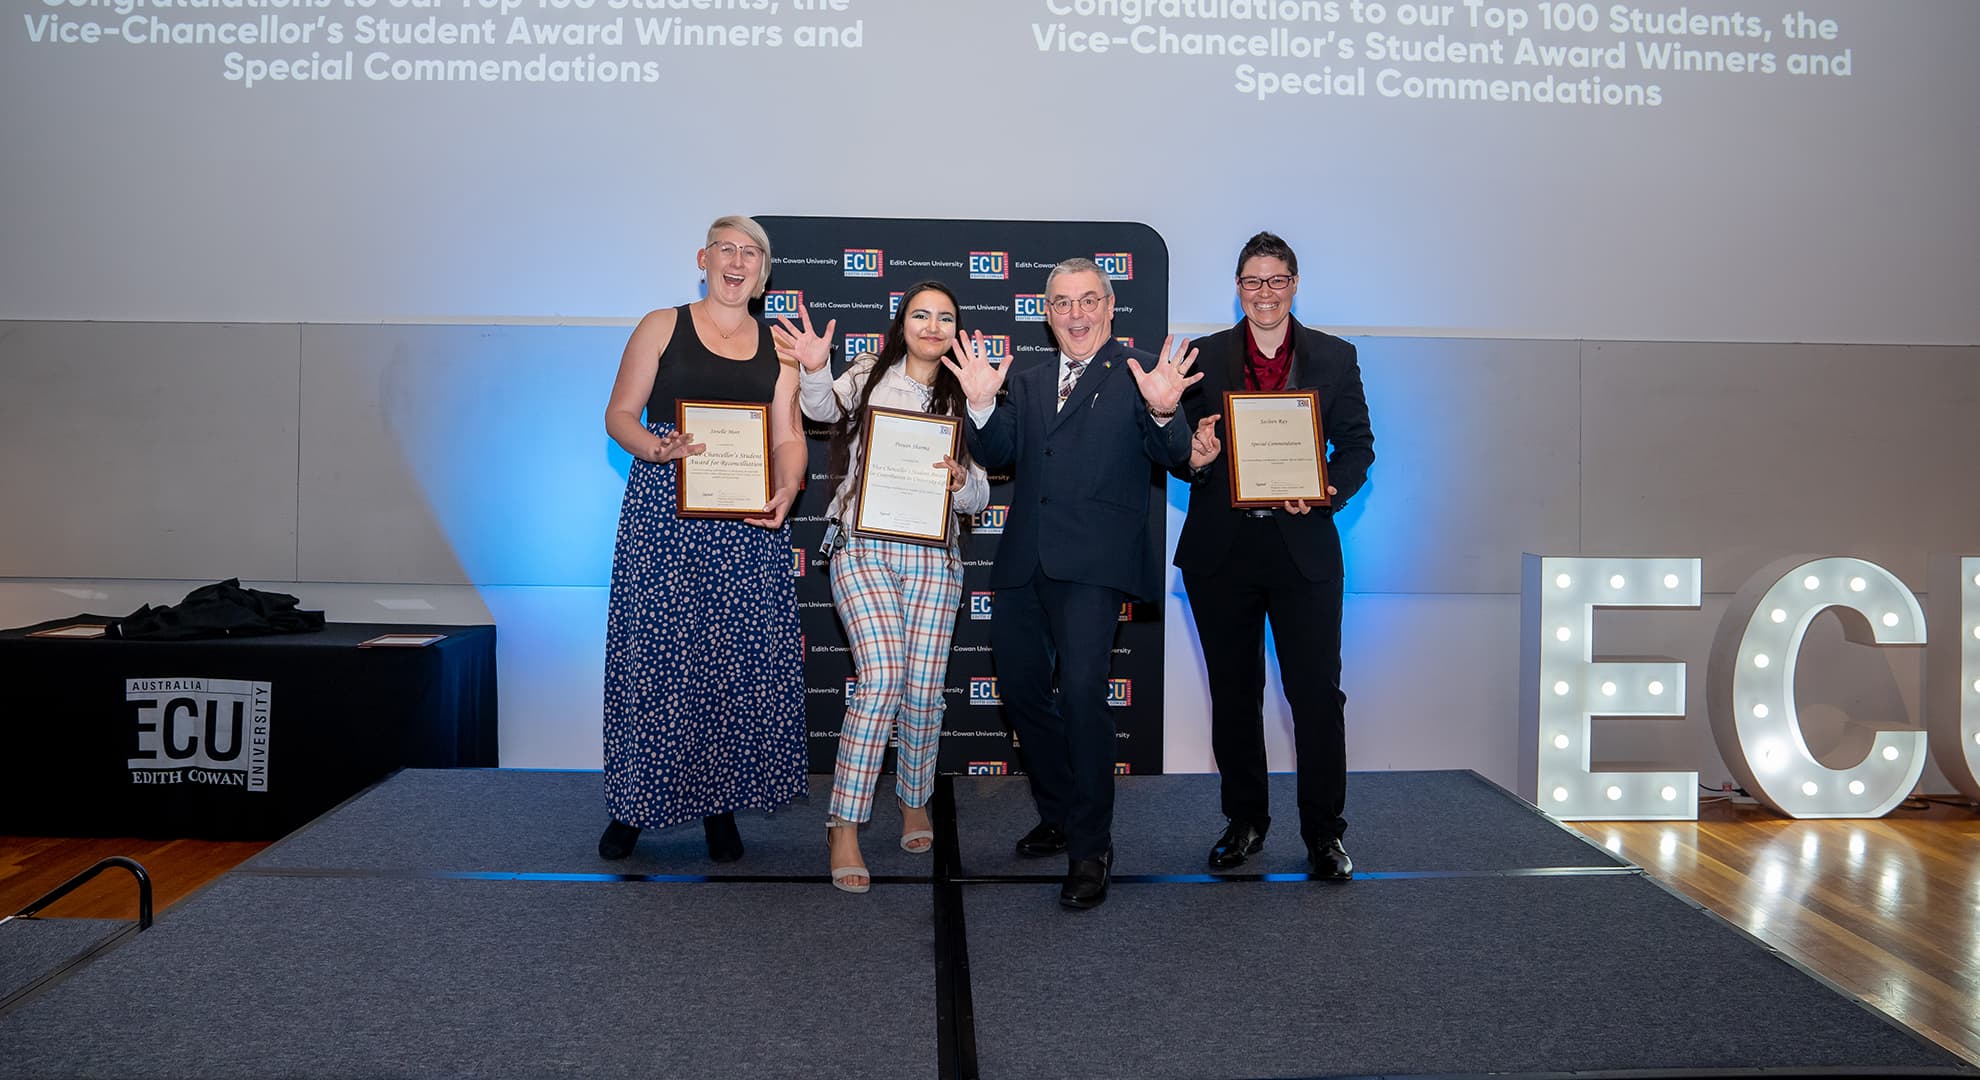 ECU student awards winners with the Vice-Chancellor.